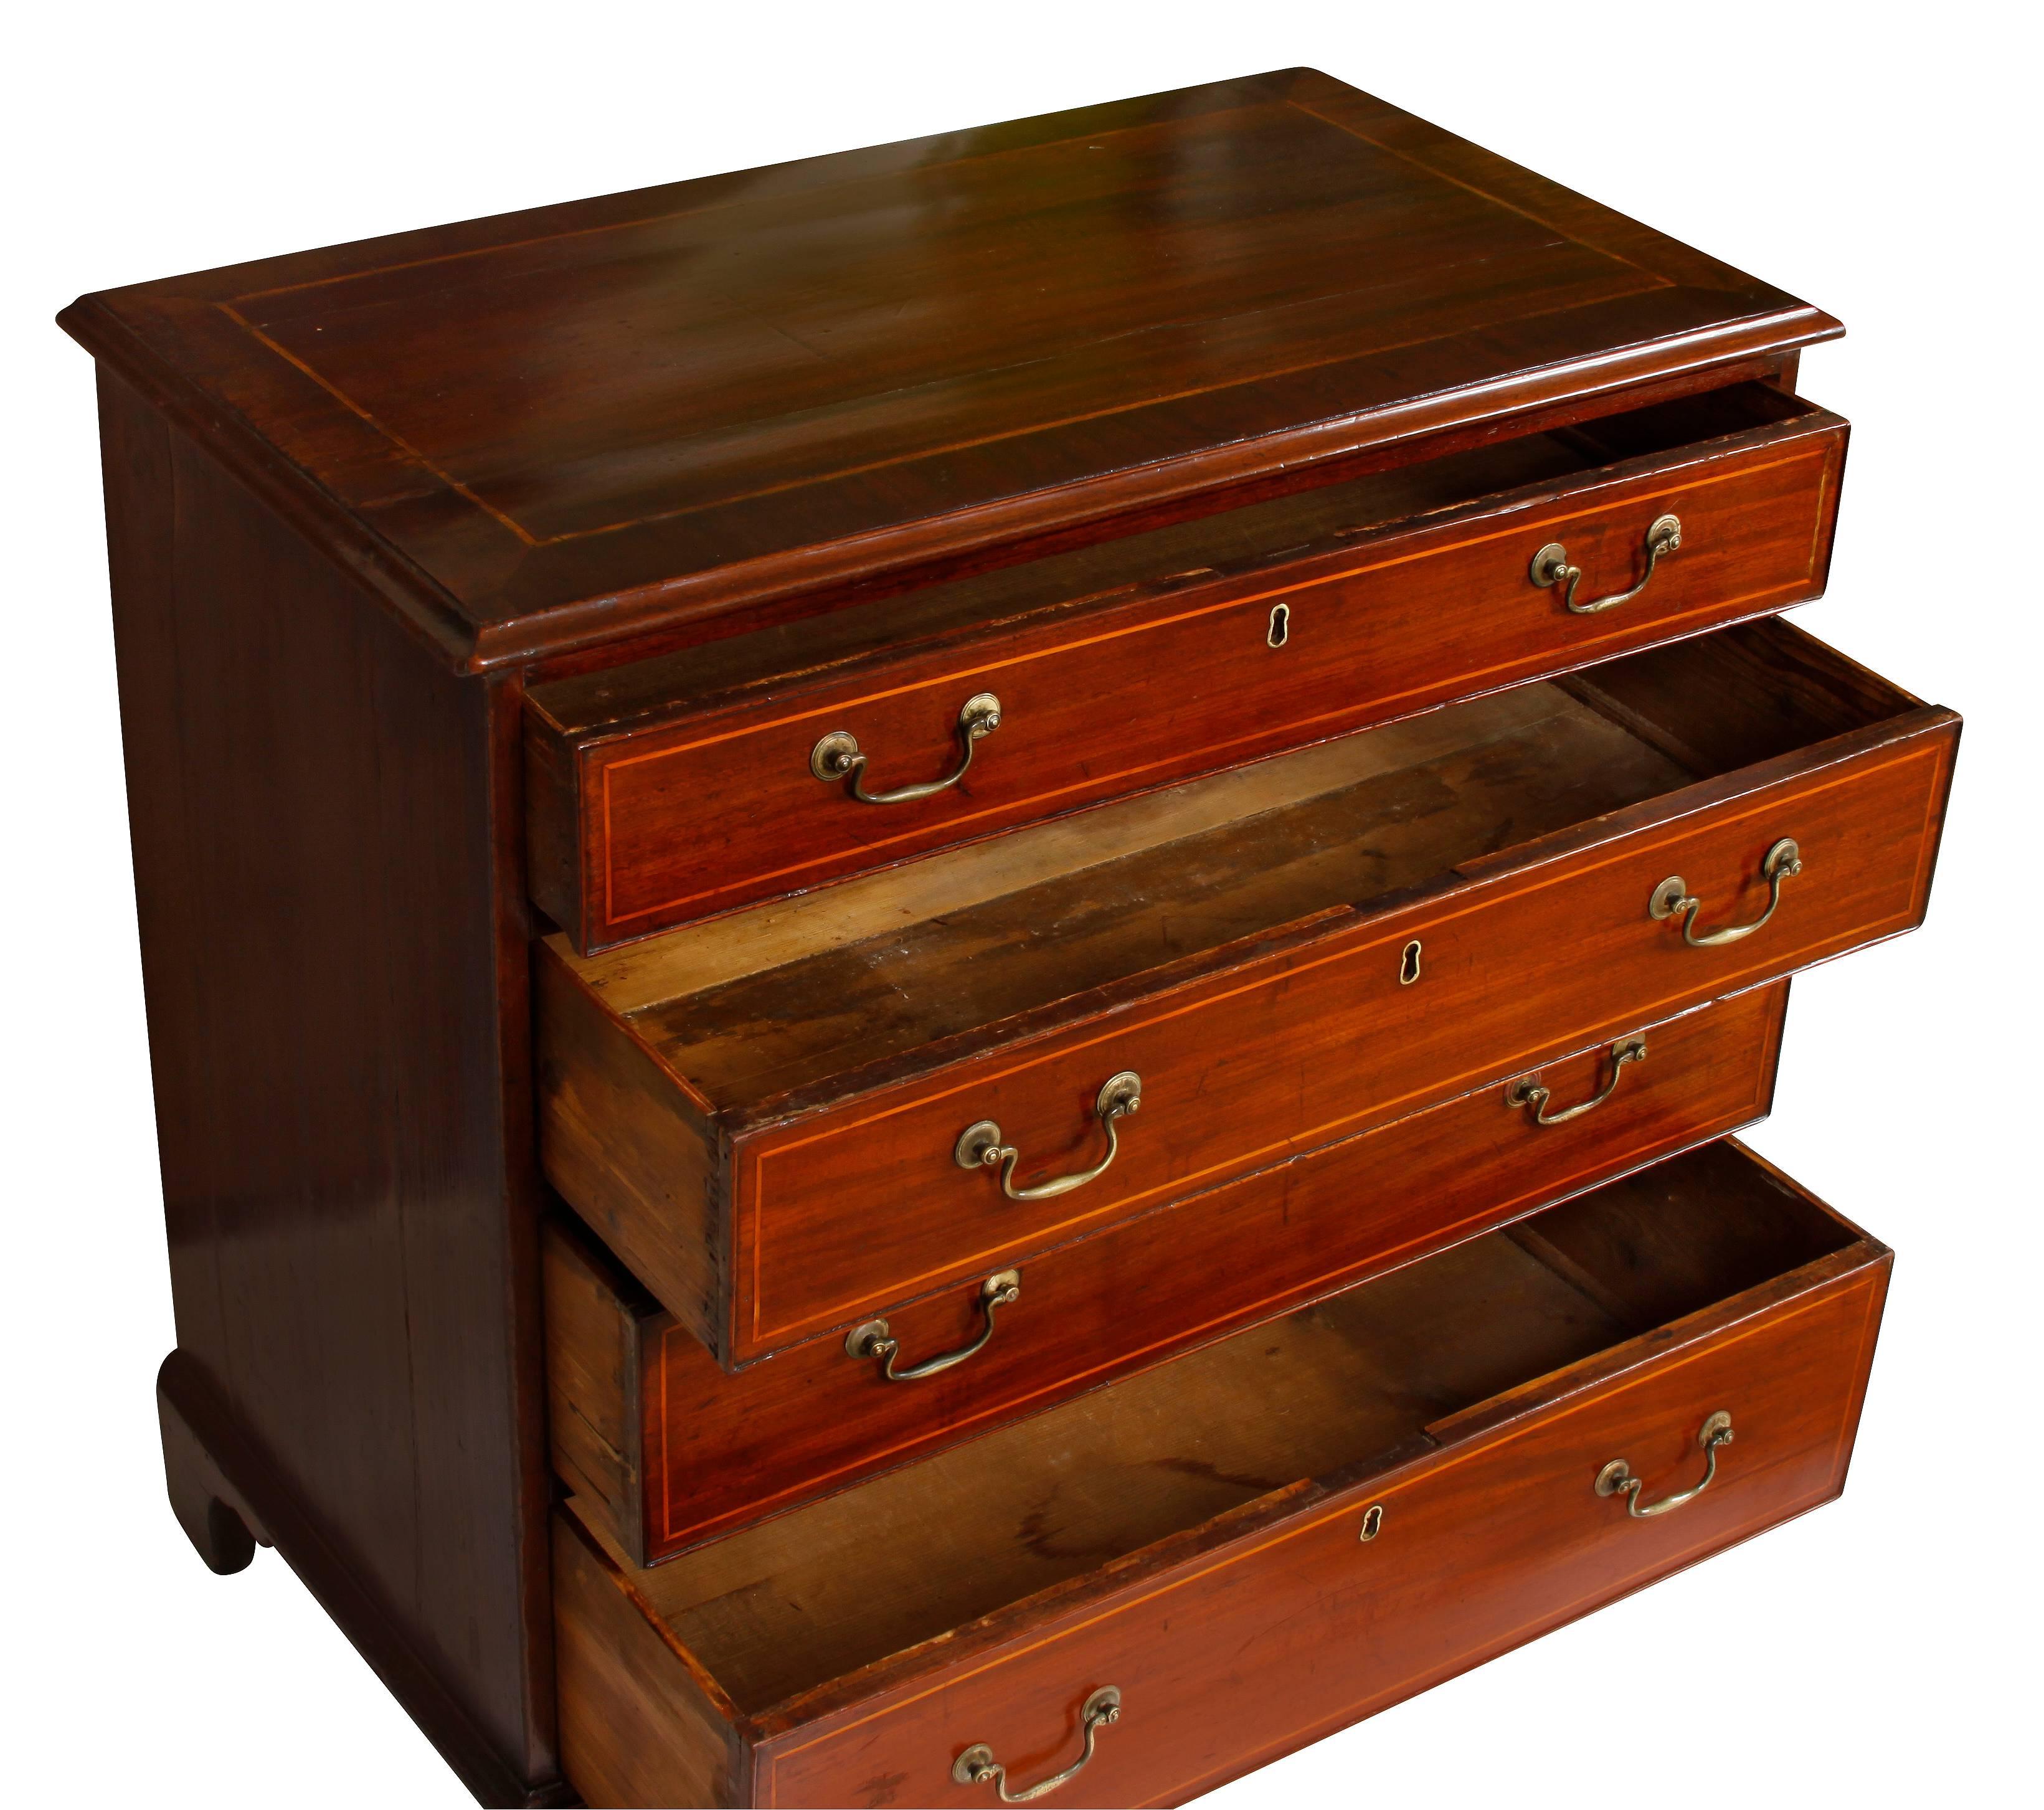 A lovely little English mahogany chest that could be freestanding, or serve as an end table or bedside table. The piece features four graduated drawers with original hardware, with simple inlaid design on top and on drawer fronts; raised on bracket